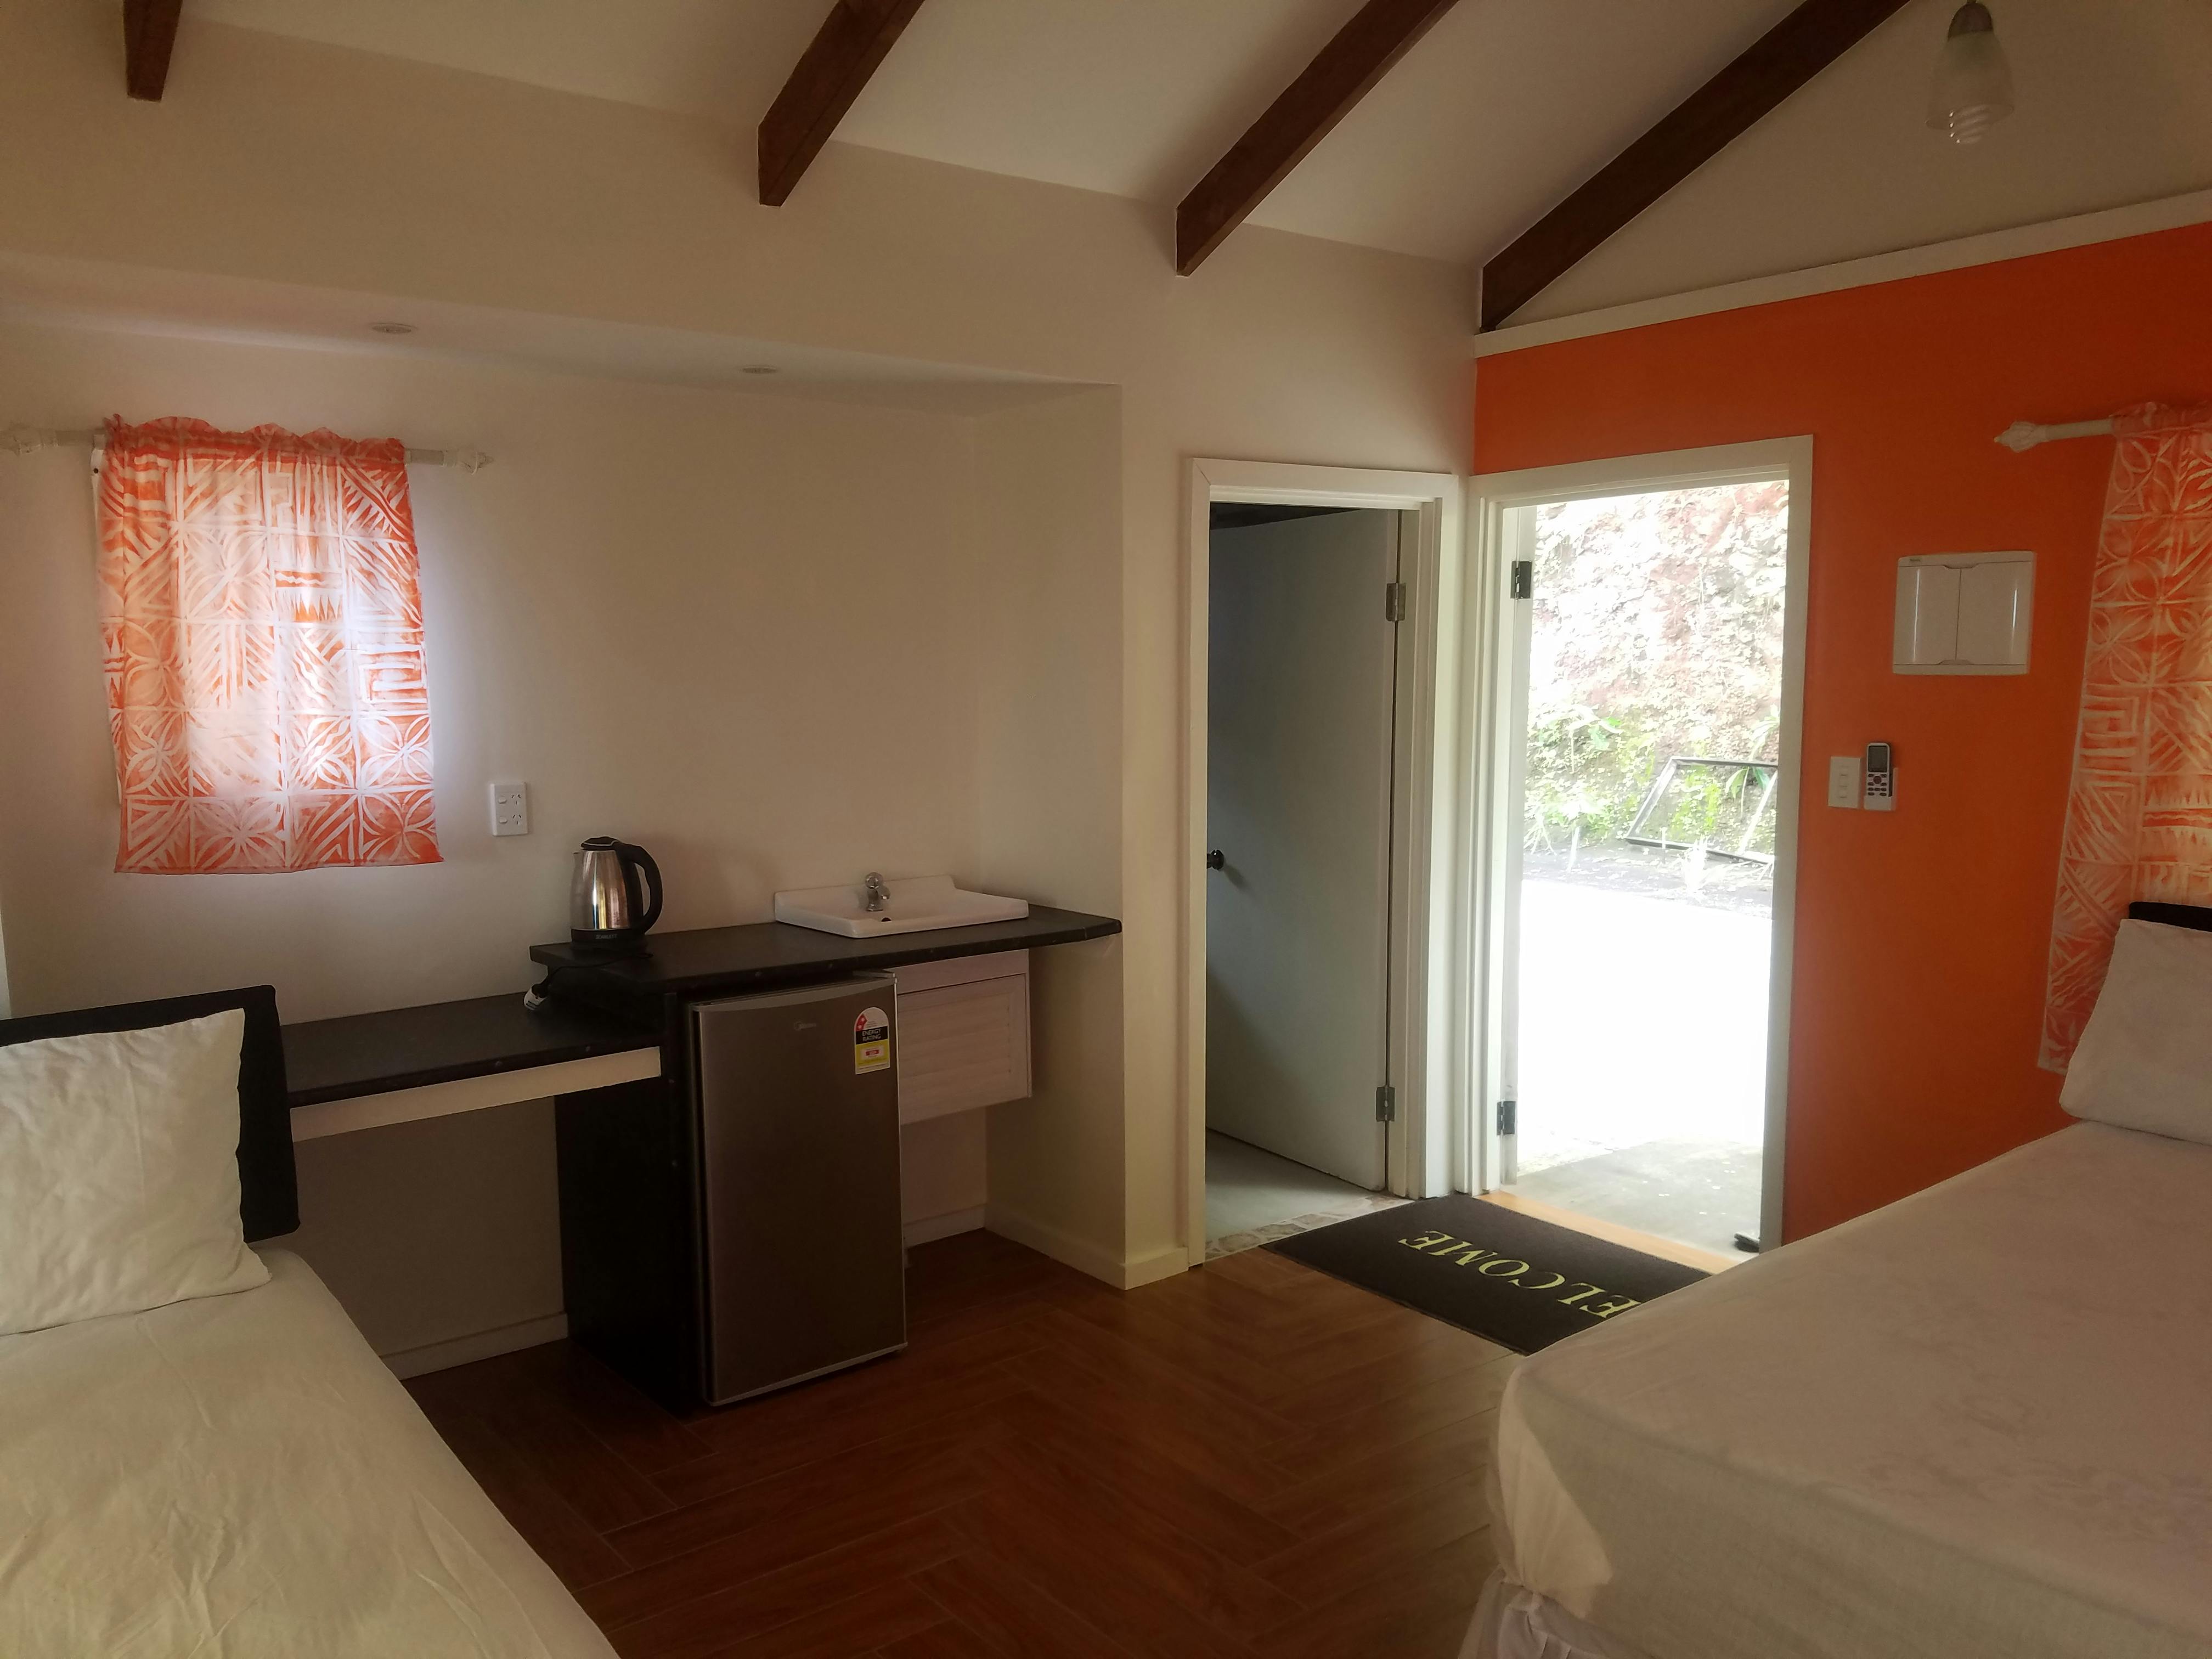 View inside Villa Level 1: Features a Queen Size bed and a single bed